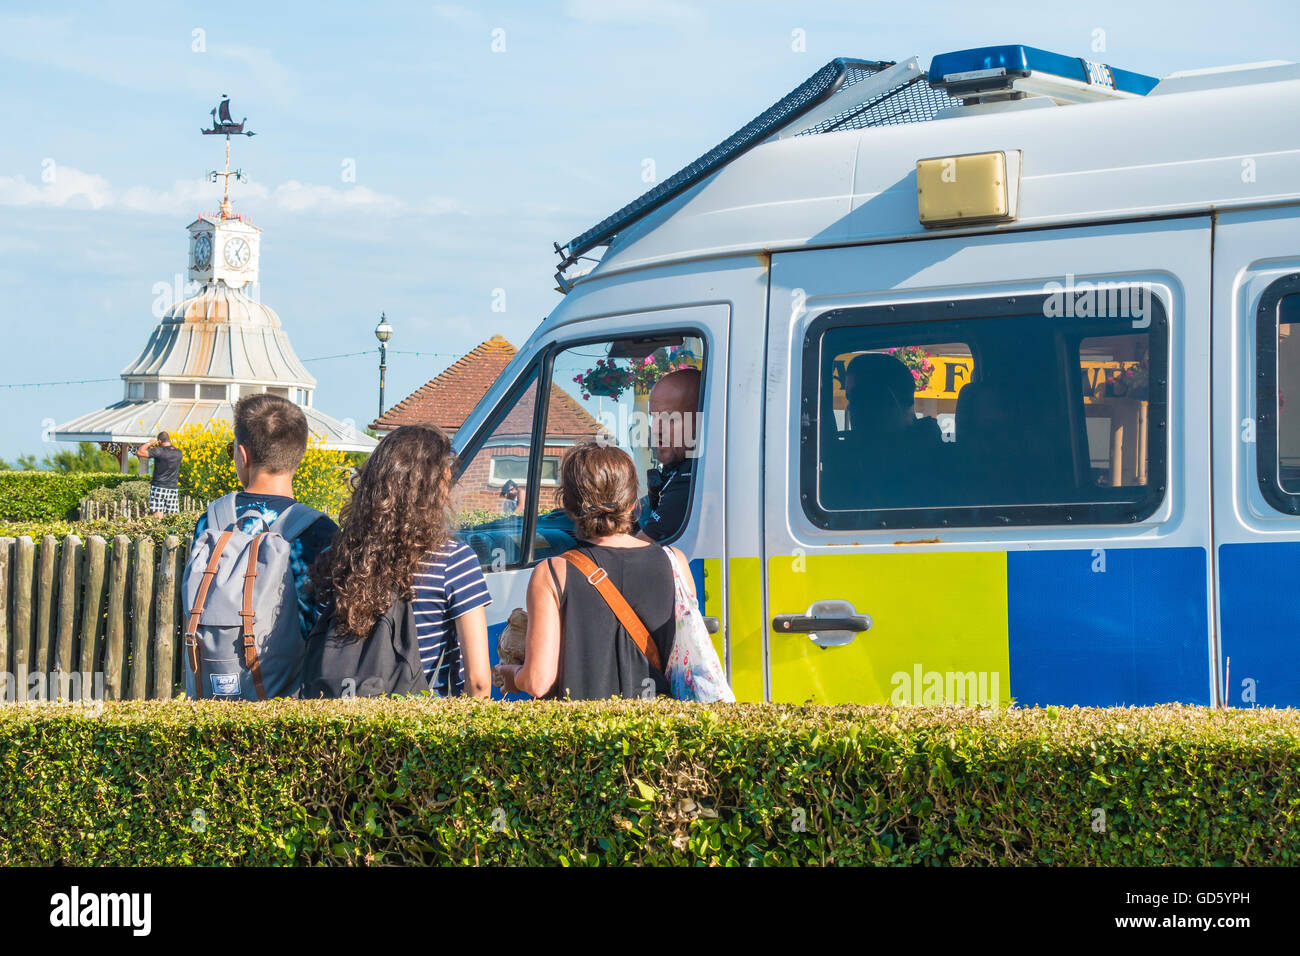 Police Speaking to Teenagers on Seafront Stock Photo